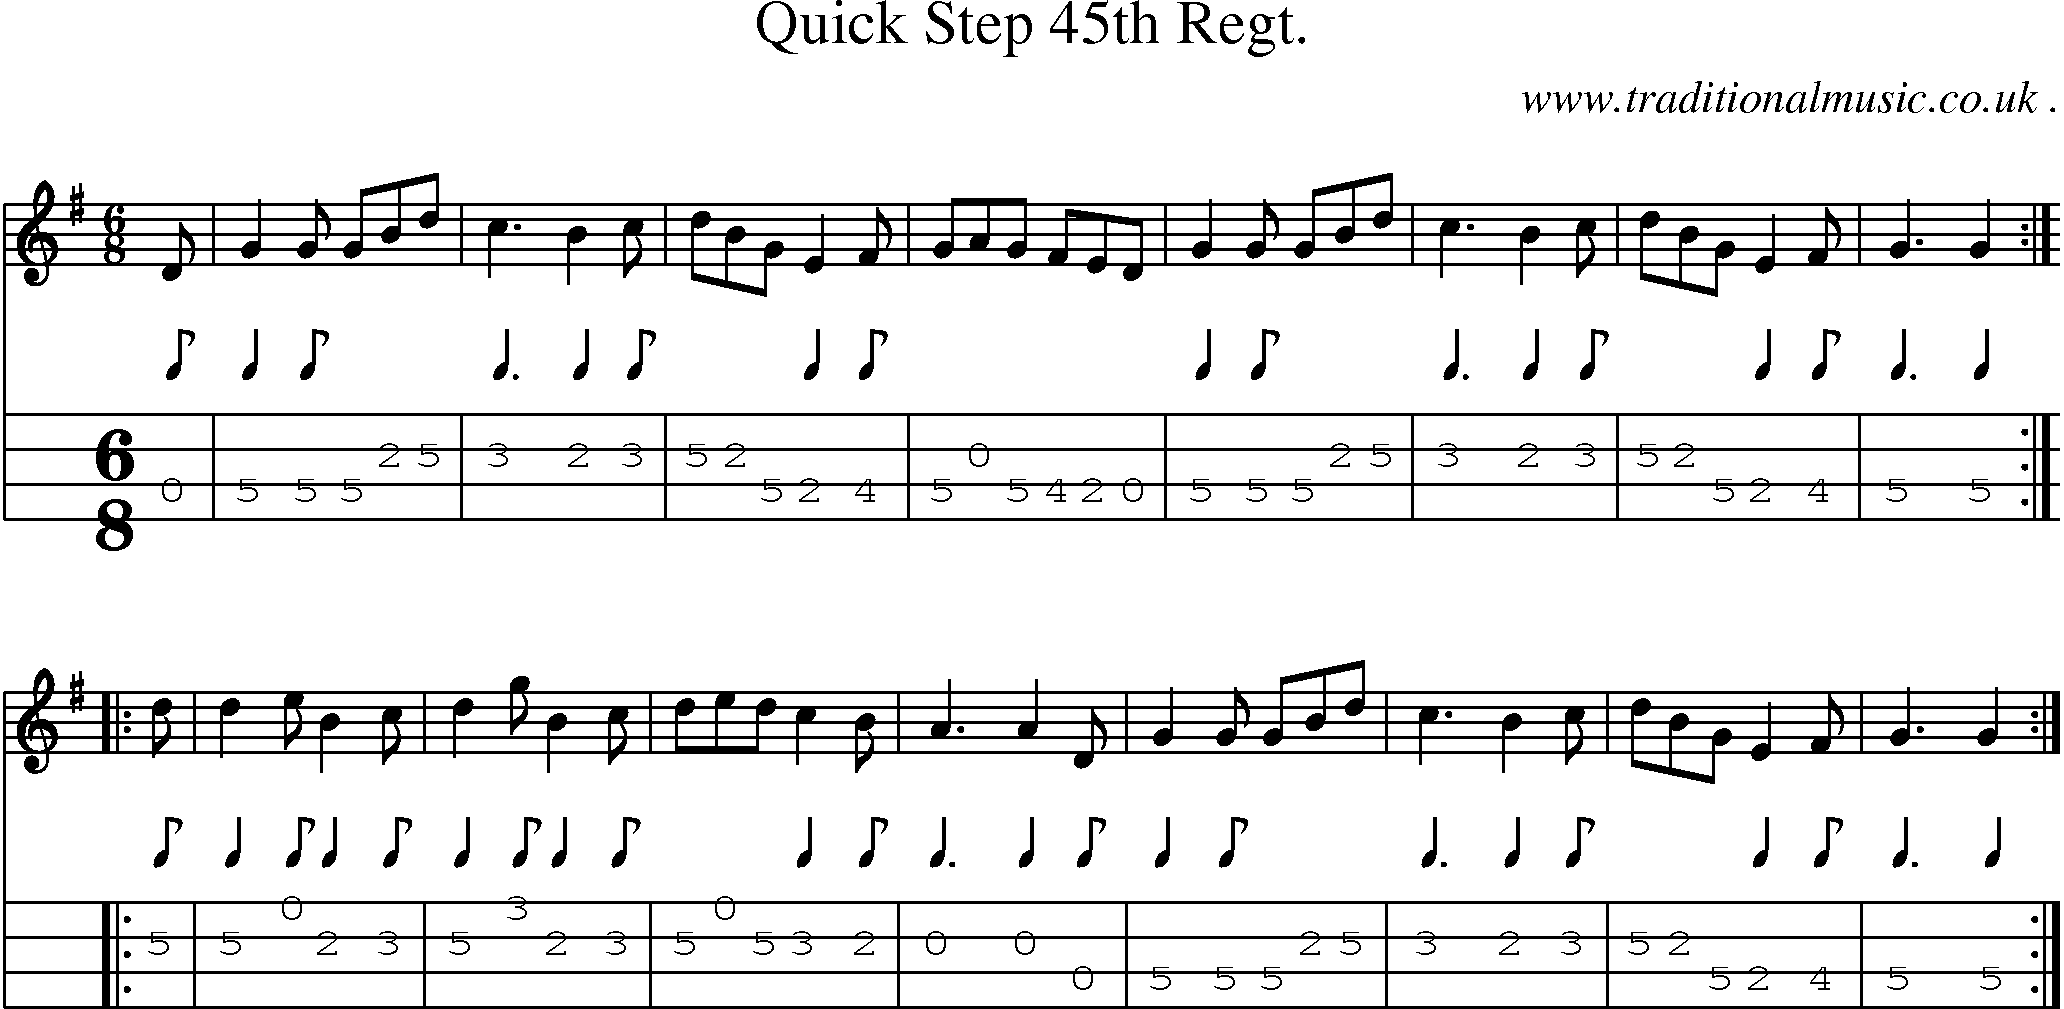 Sheet-Music and Mandolin Tabs for Quick Step 45th Regt